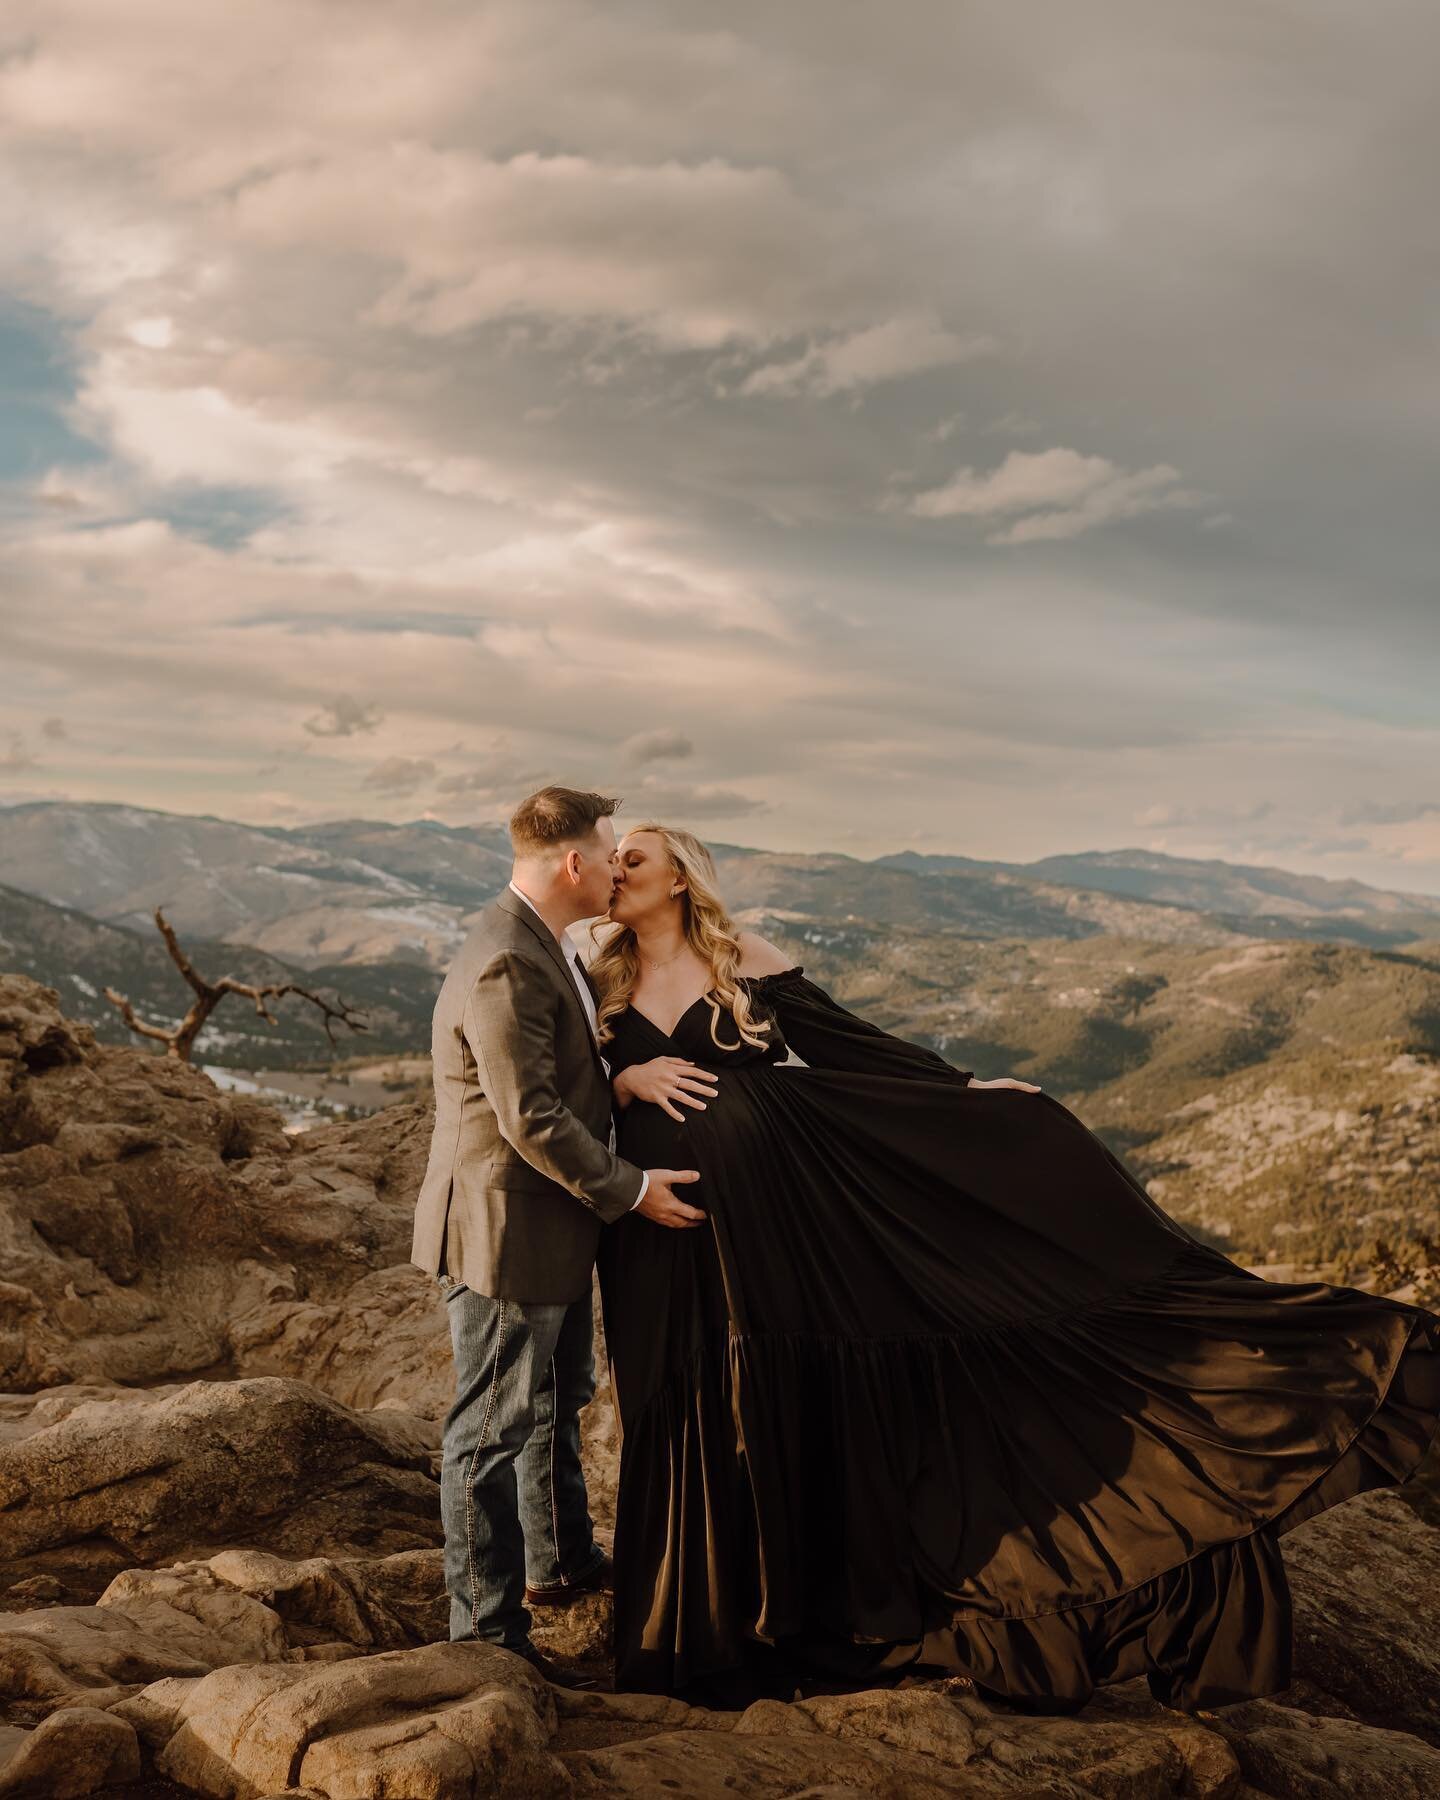 The most dreamy maternity session from earlier this year 🖤
&bull;
This beautiful couple braved the winds on the mountain top for some epic Maternity shots! I just love my couples so much and LOVE maternity sessions - it such a beautiful chapter ❤️
&